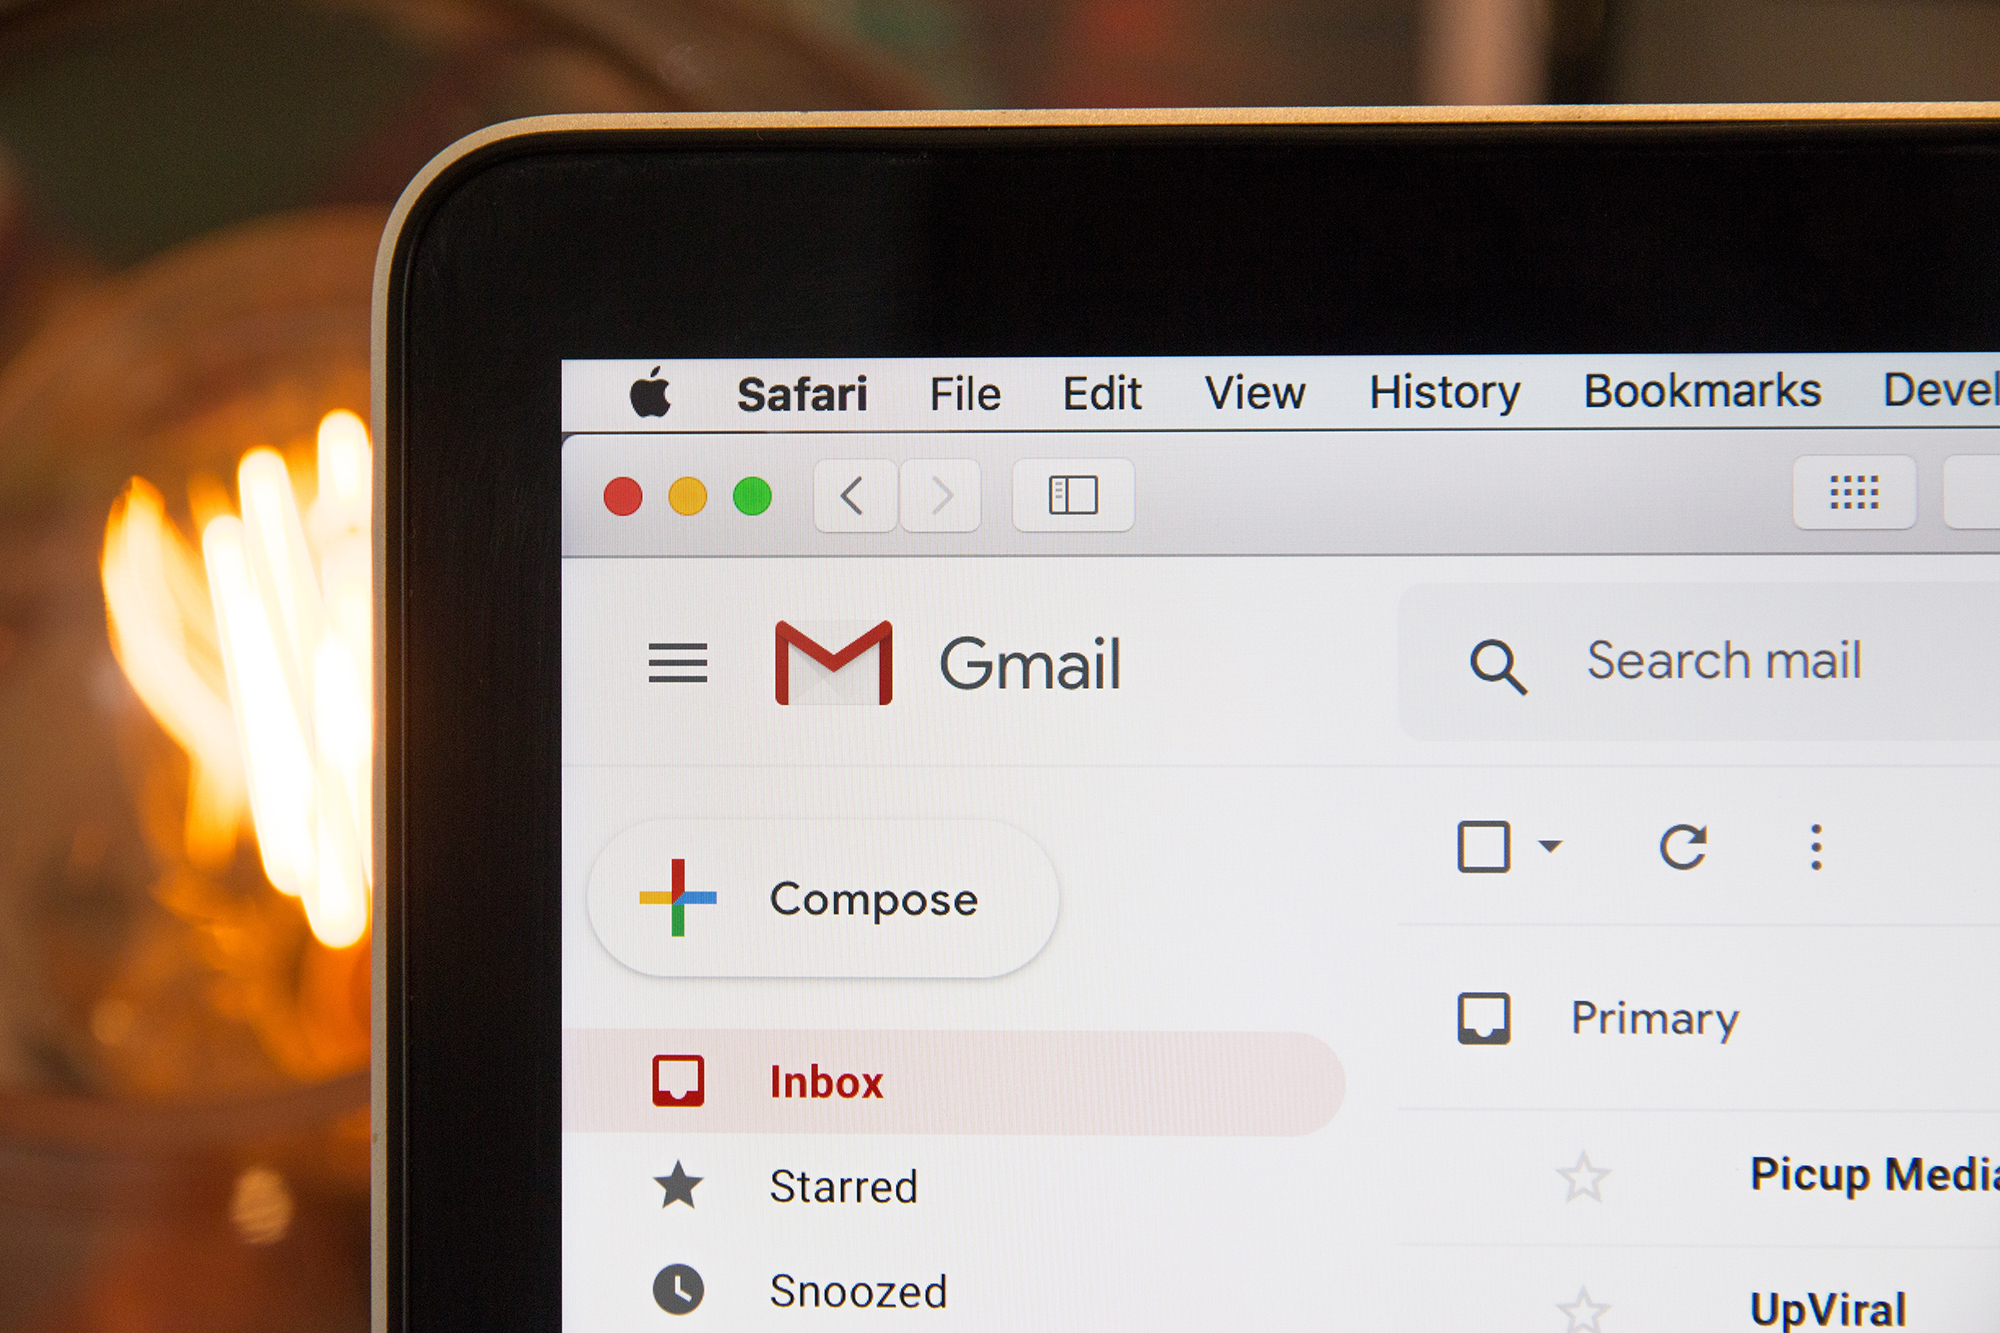 Gmail image to show how Gmail might not be safe for email